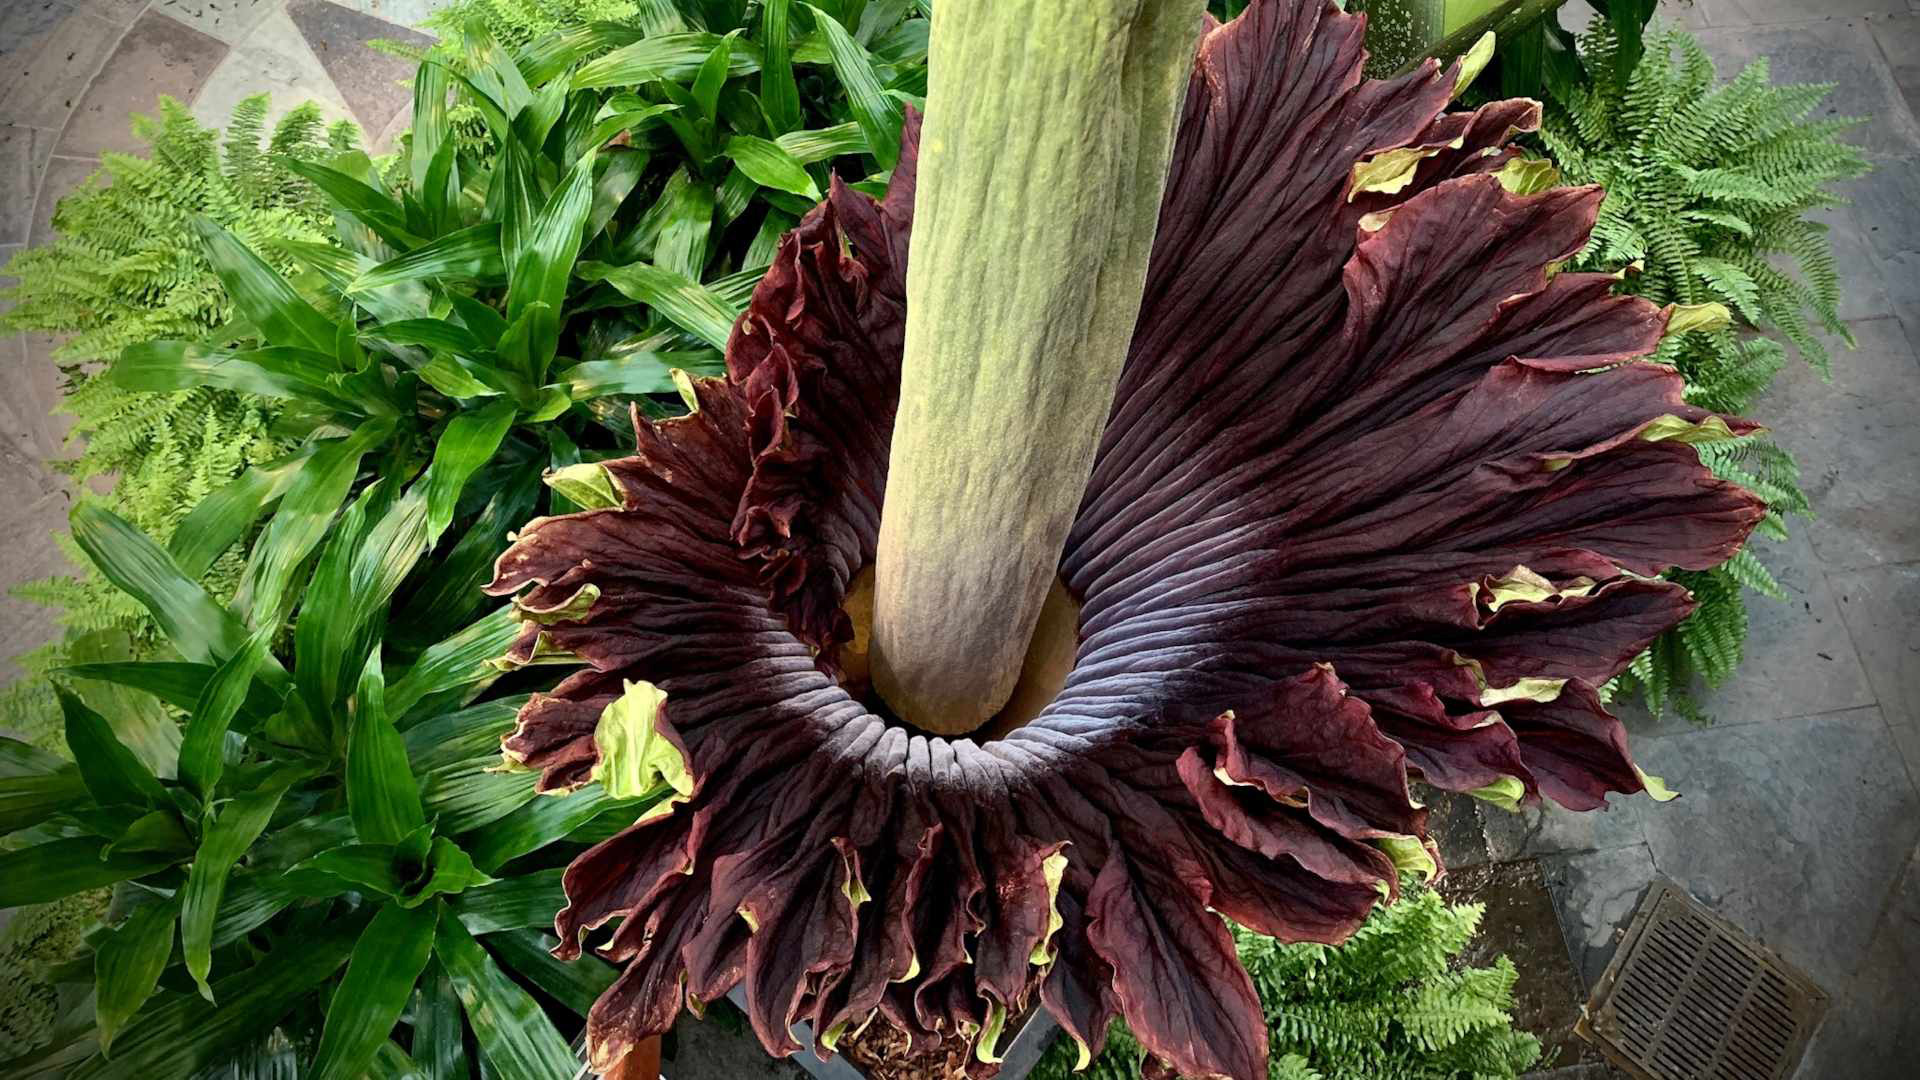 Corpse flowers across the country are swapping pollen to stay stinky